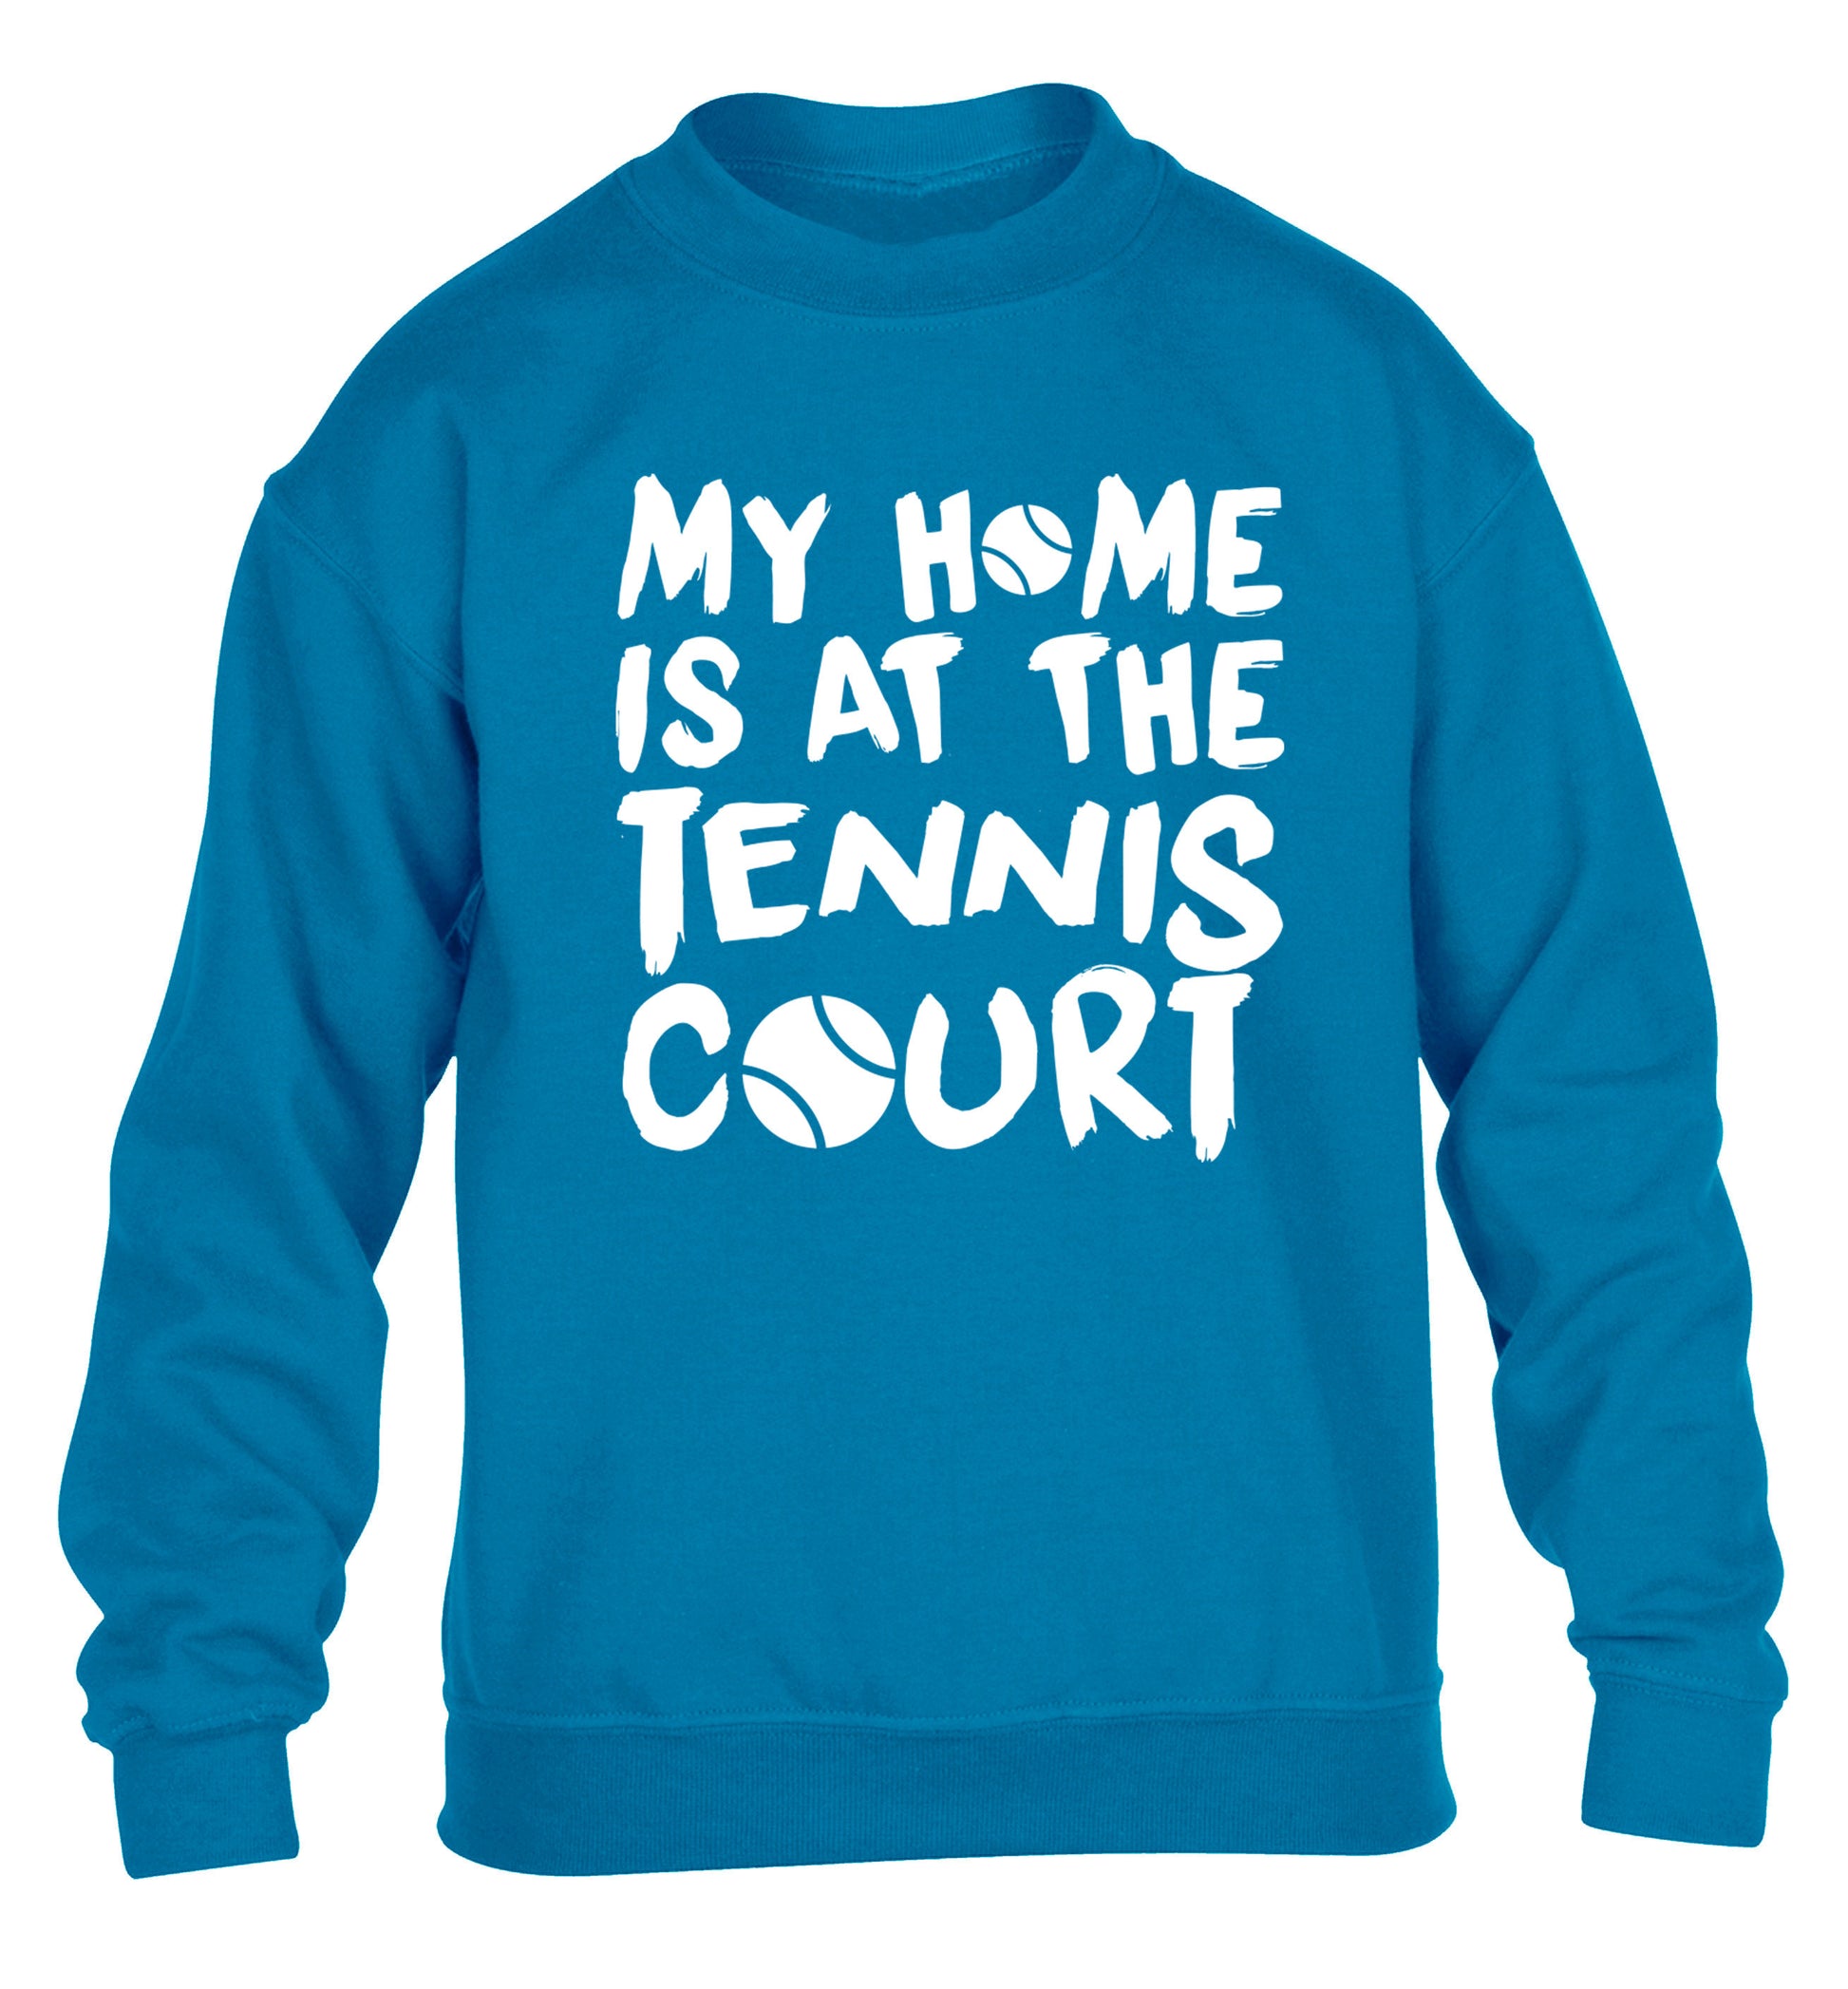 My home is at the tennis court children's blue sweater 12-14 Years